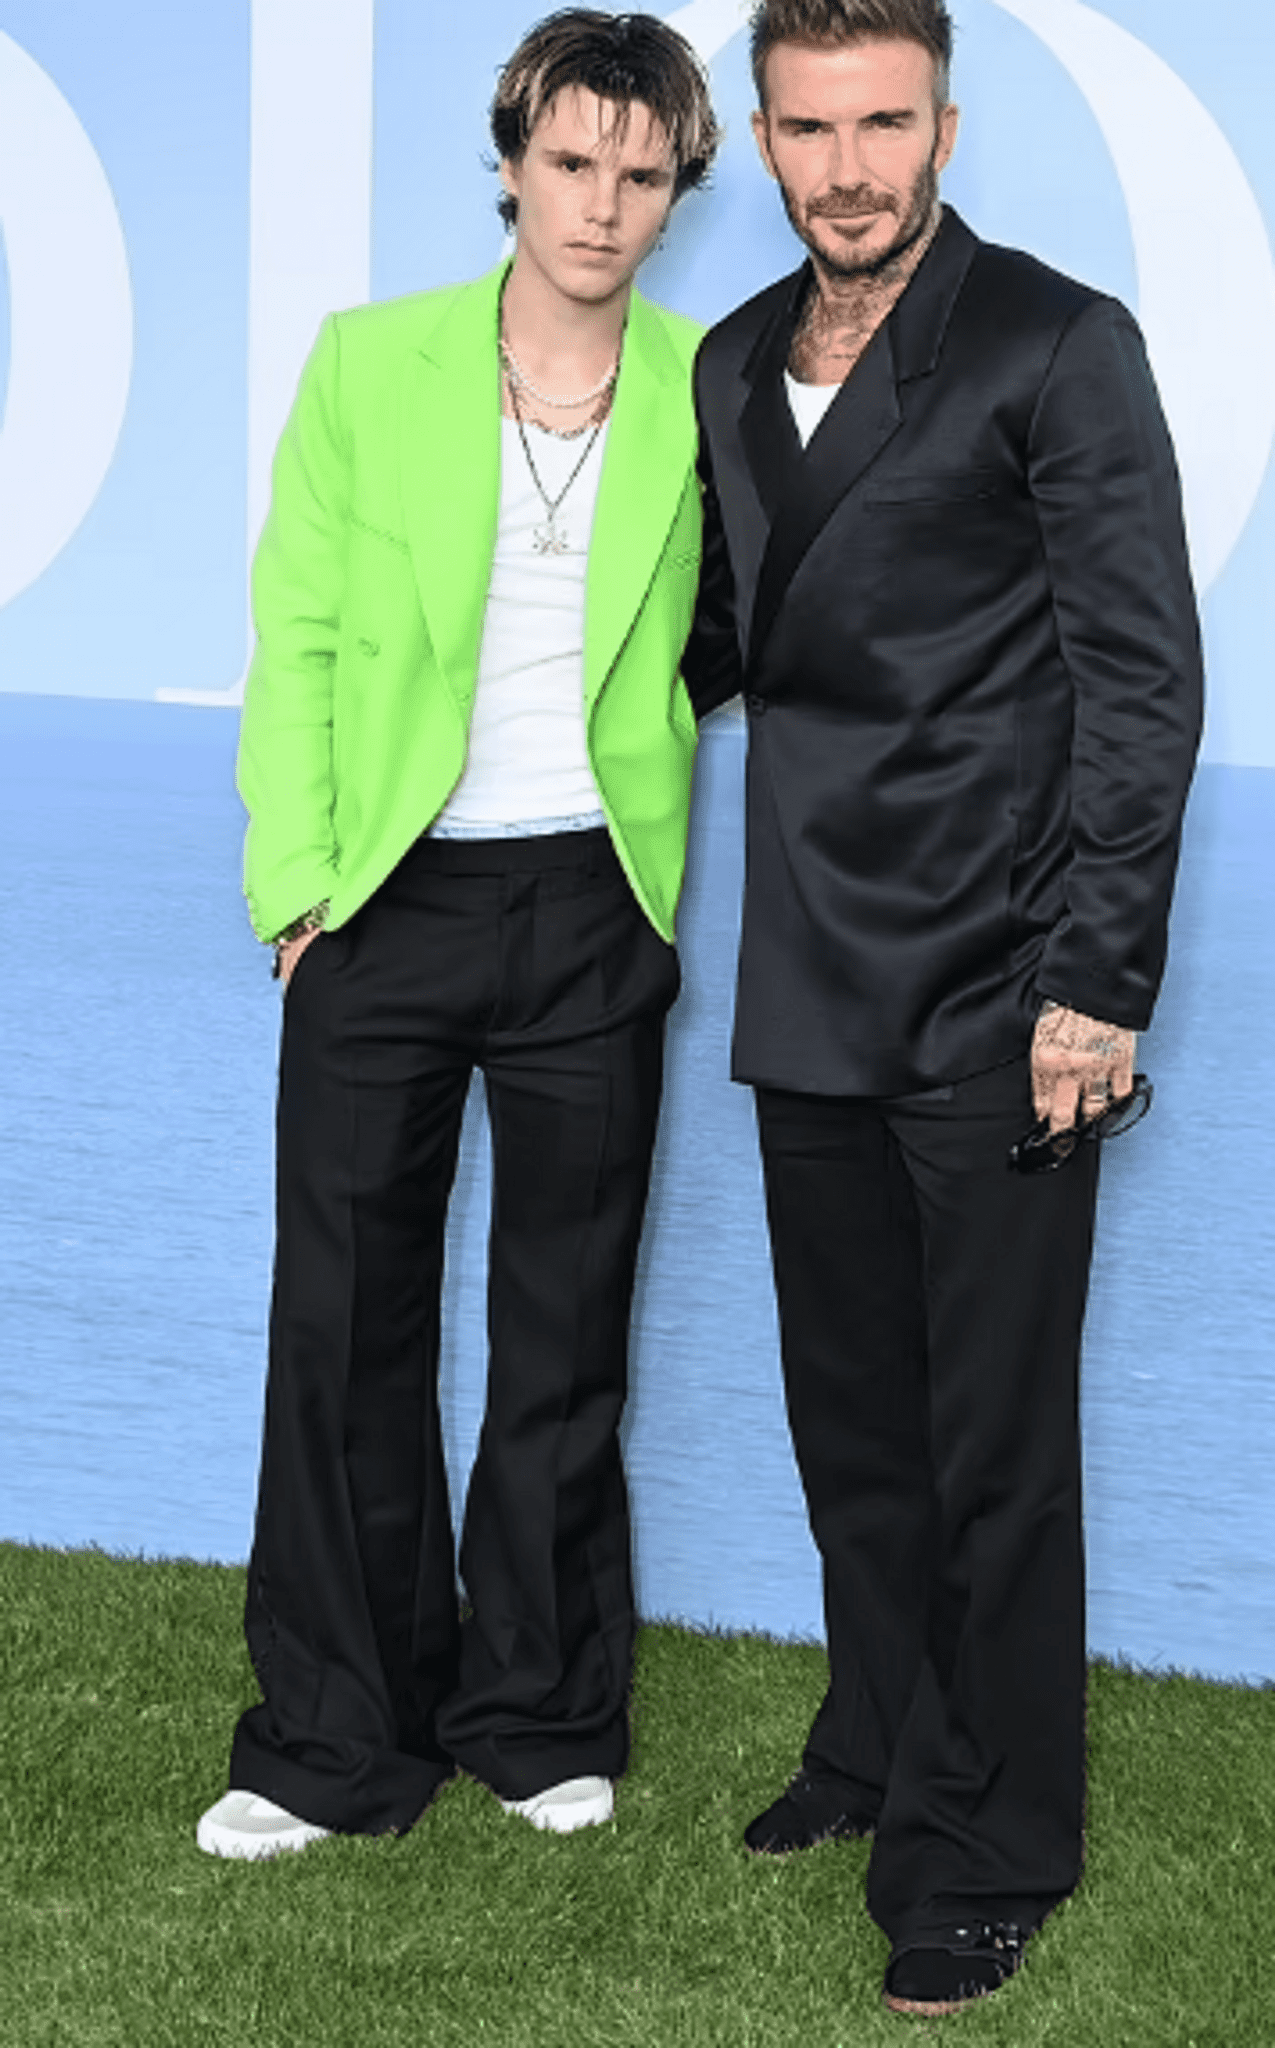 david-beckham-attends-the-dior-fashion-show-with-his-youngest-son-cruz